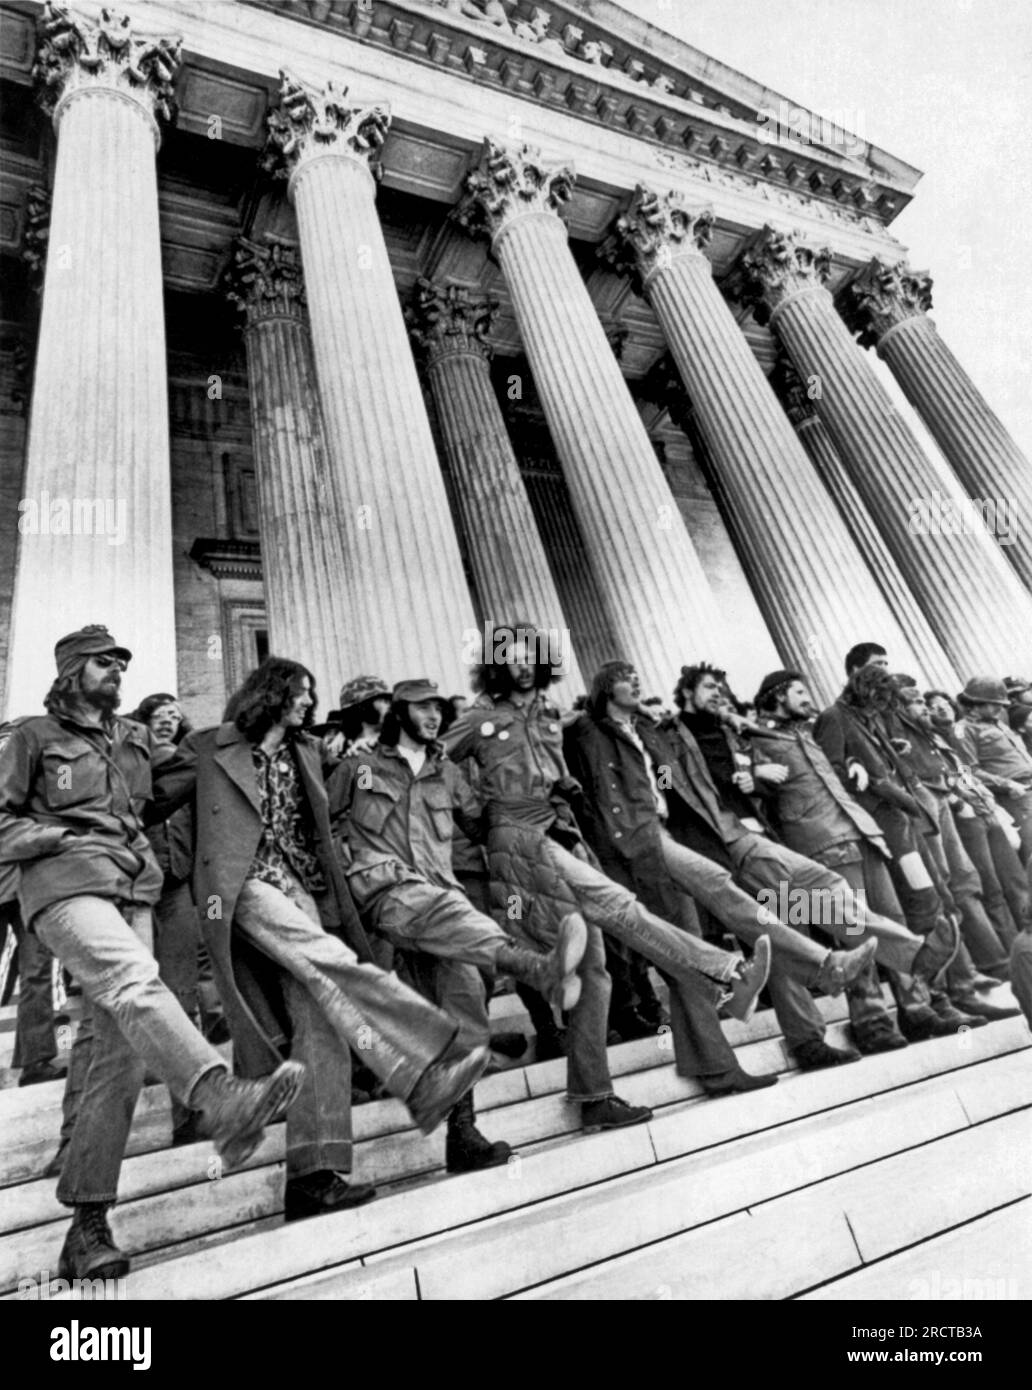 Washington, D.C.,  April 22, 1971 Vietnam veterans, who are opposed to the war in Vietnam, demonstrate on the steps of the Supreme Court Building. Stock Photo